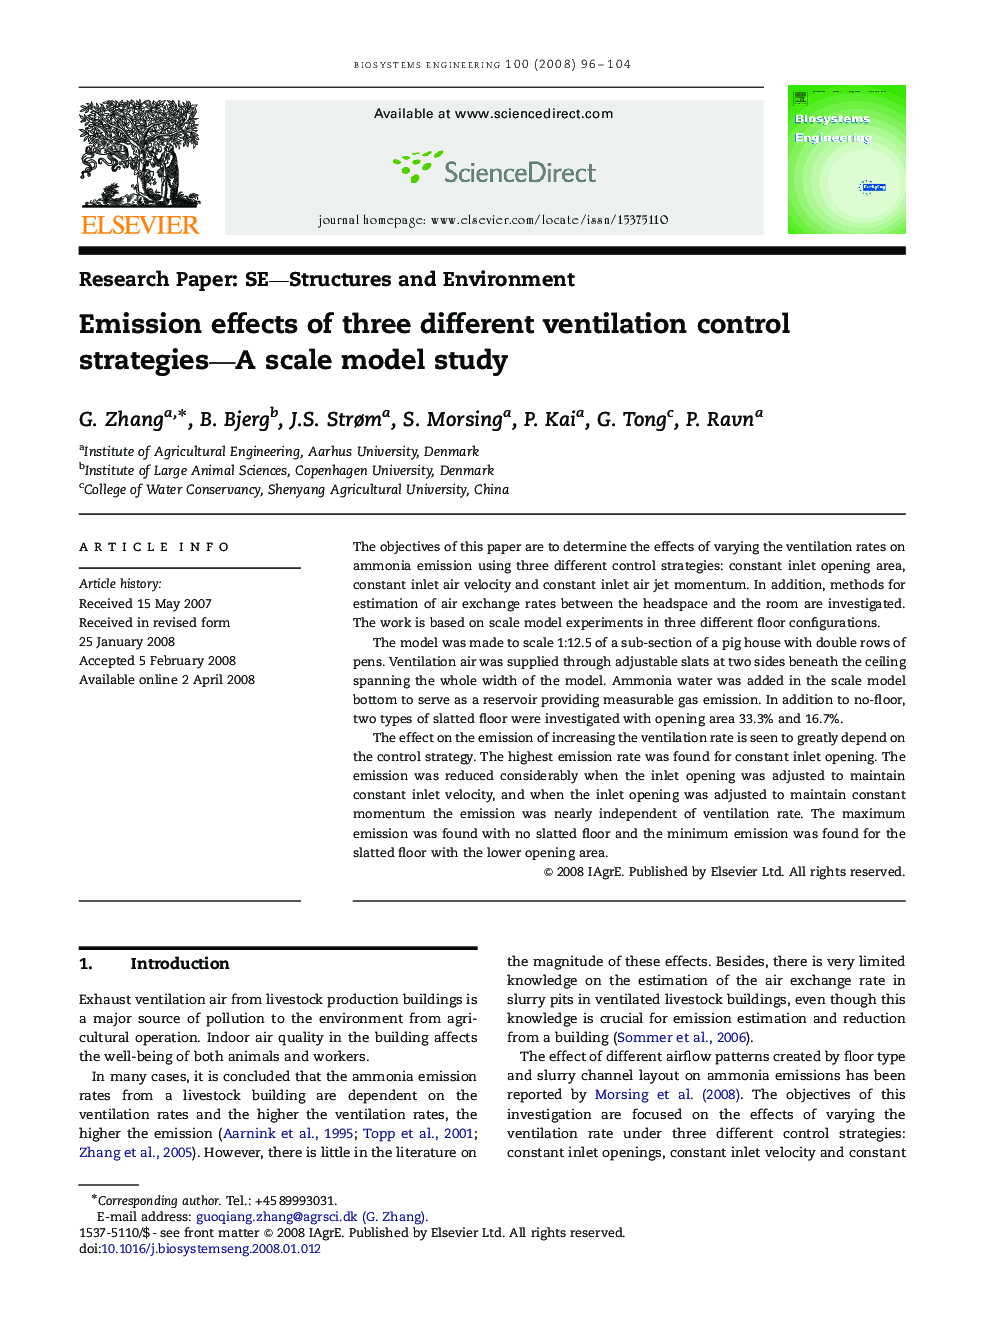 Emission effects of three different ventilation control strategies—A scale model study